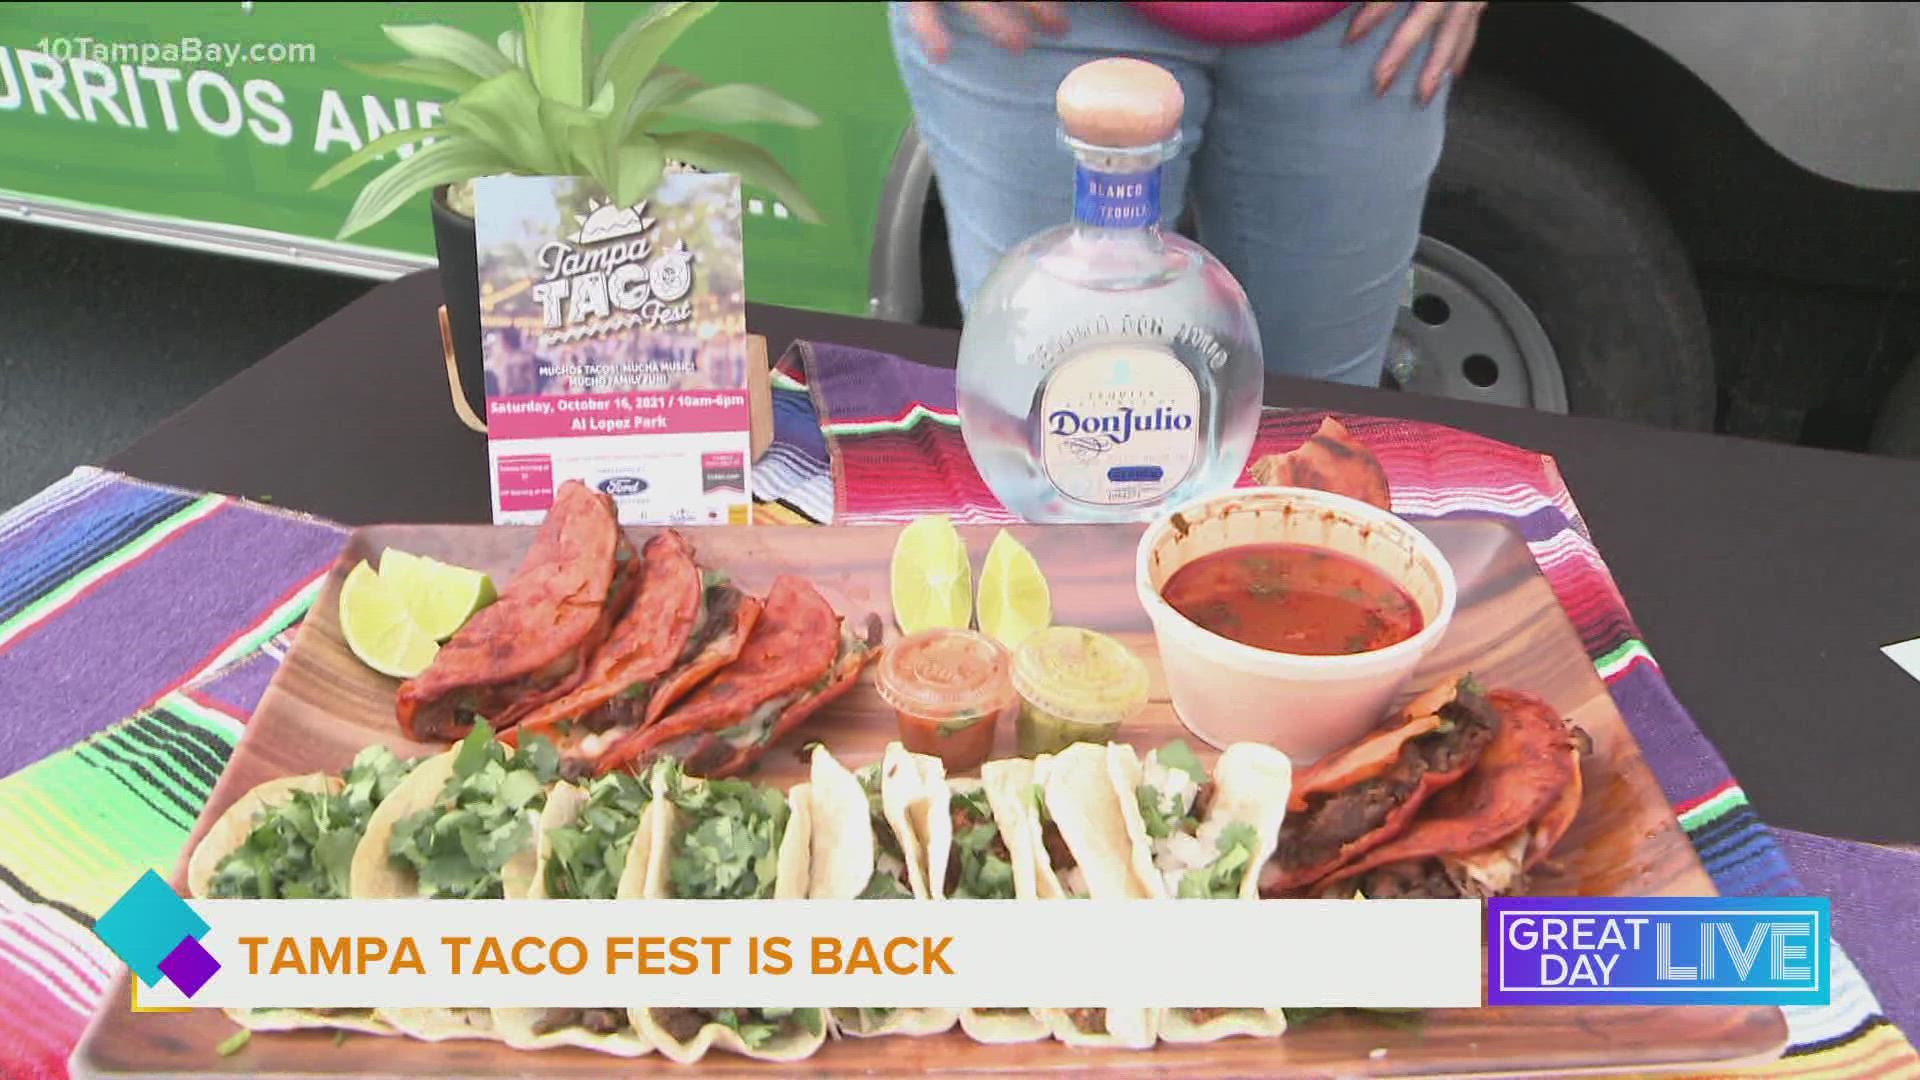 Tampa Taco Fest is back